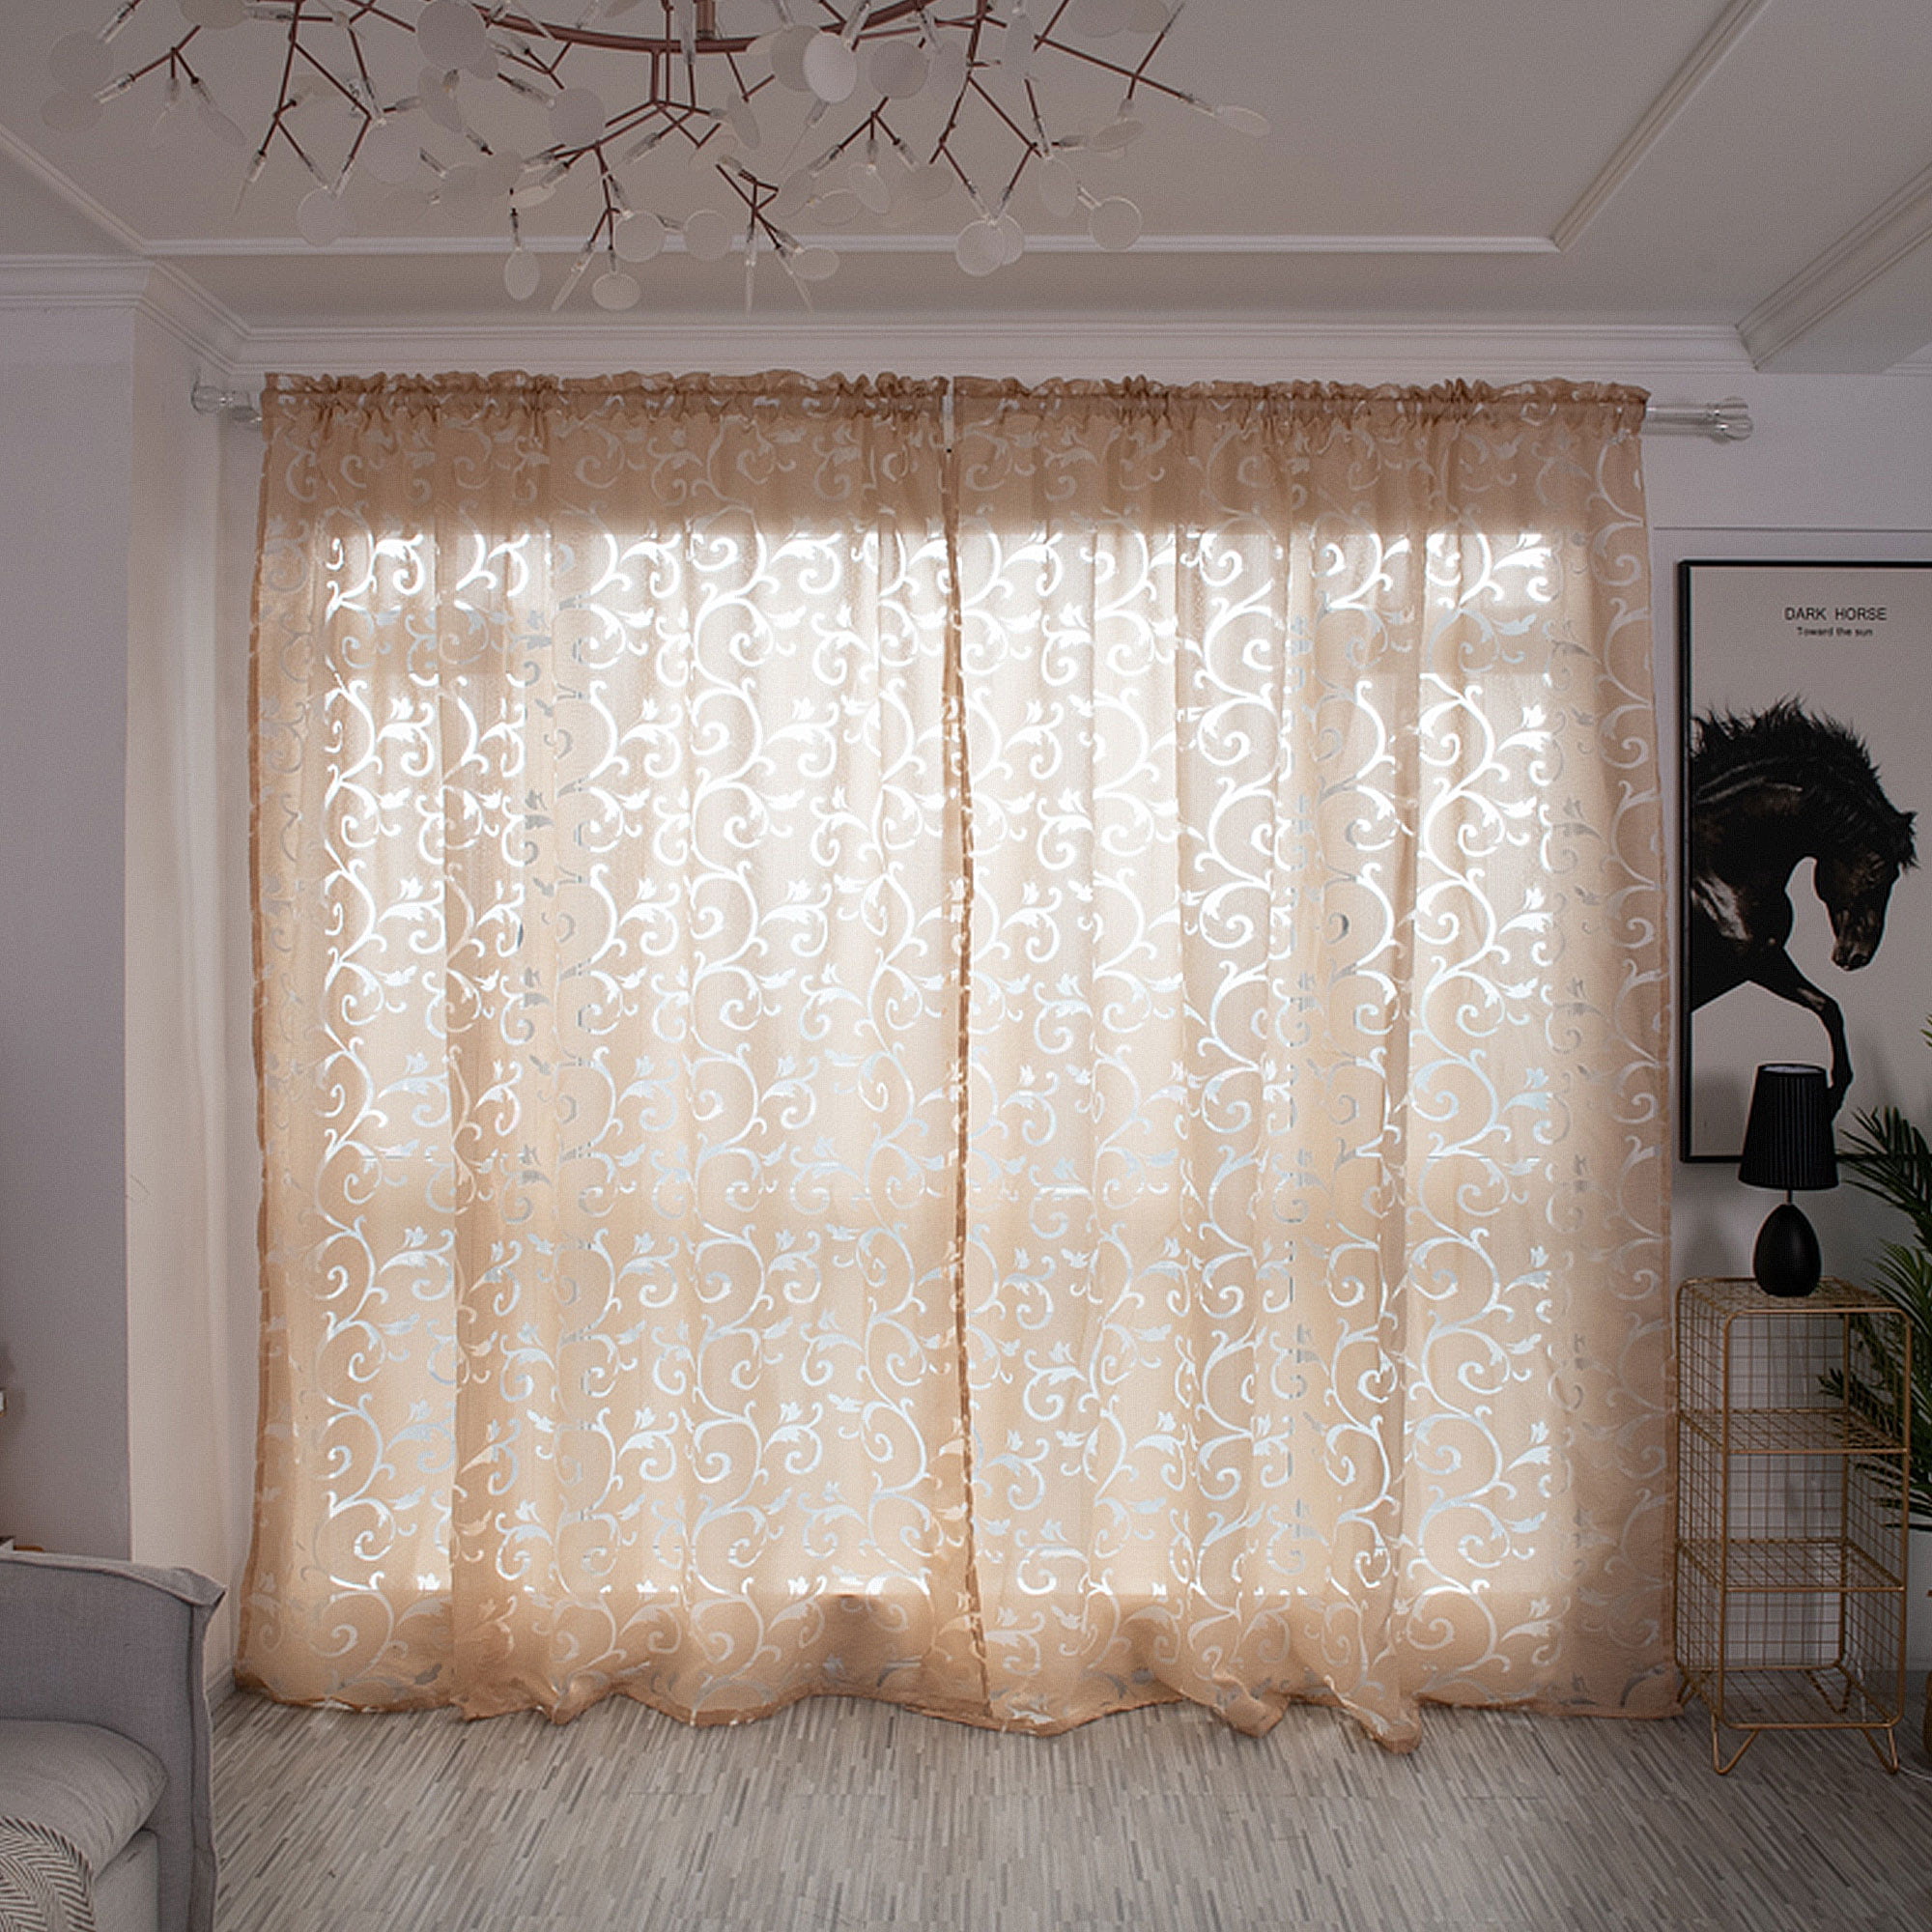 Window Scarf European Style Valances Curtain Voile For Living Room Office Decor 